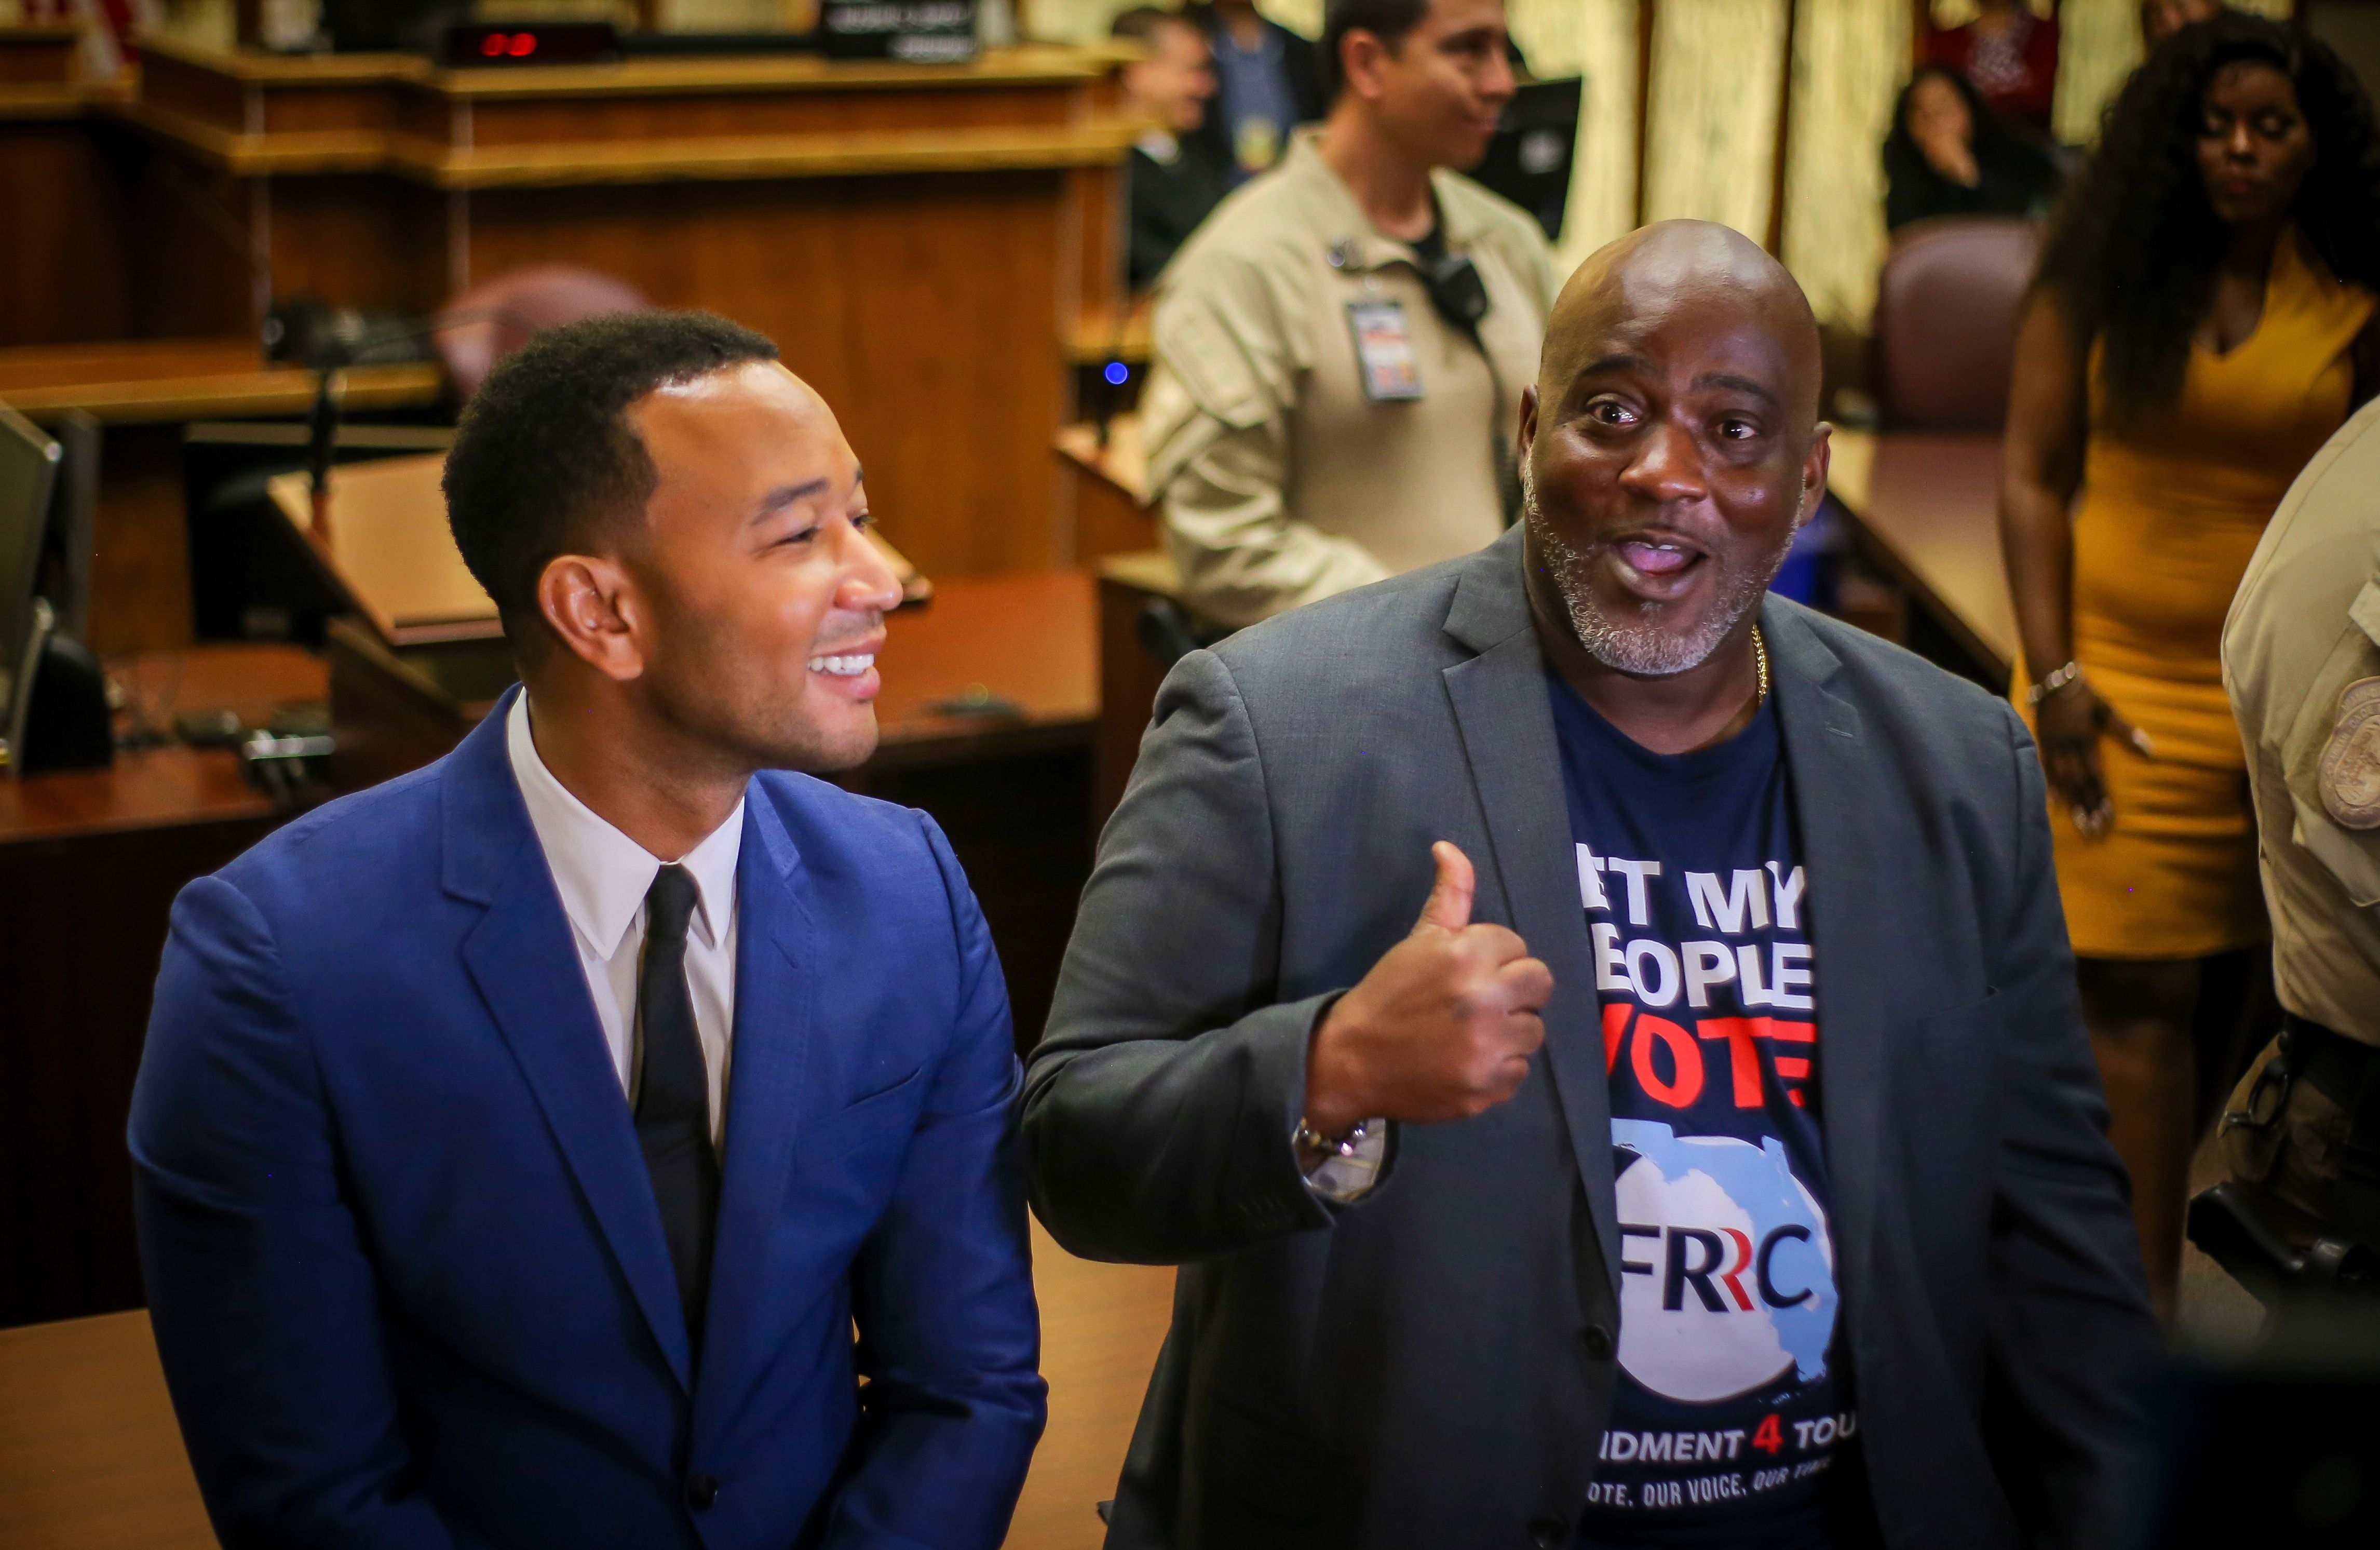 Singer songwriter John Legend (left) and president of the Florida Rights Restoration Coalition Desmond Meade speak to reporters after a court hearing aimed at restoring the right to vote under Florida's Amendment 4